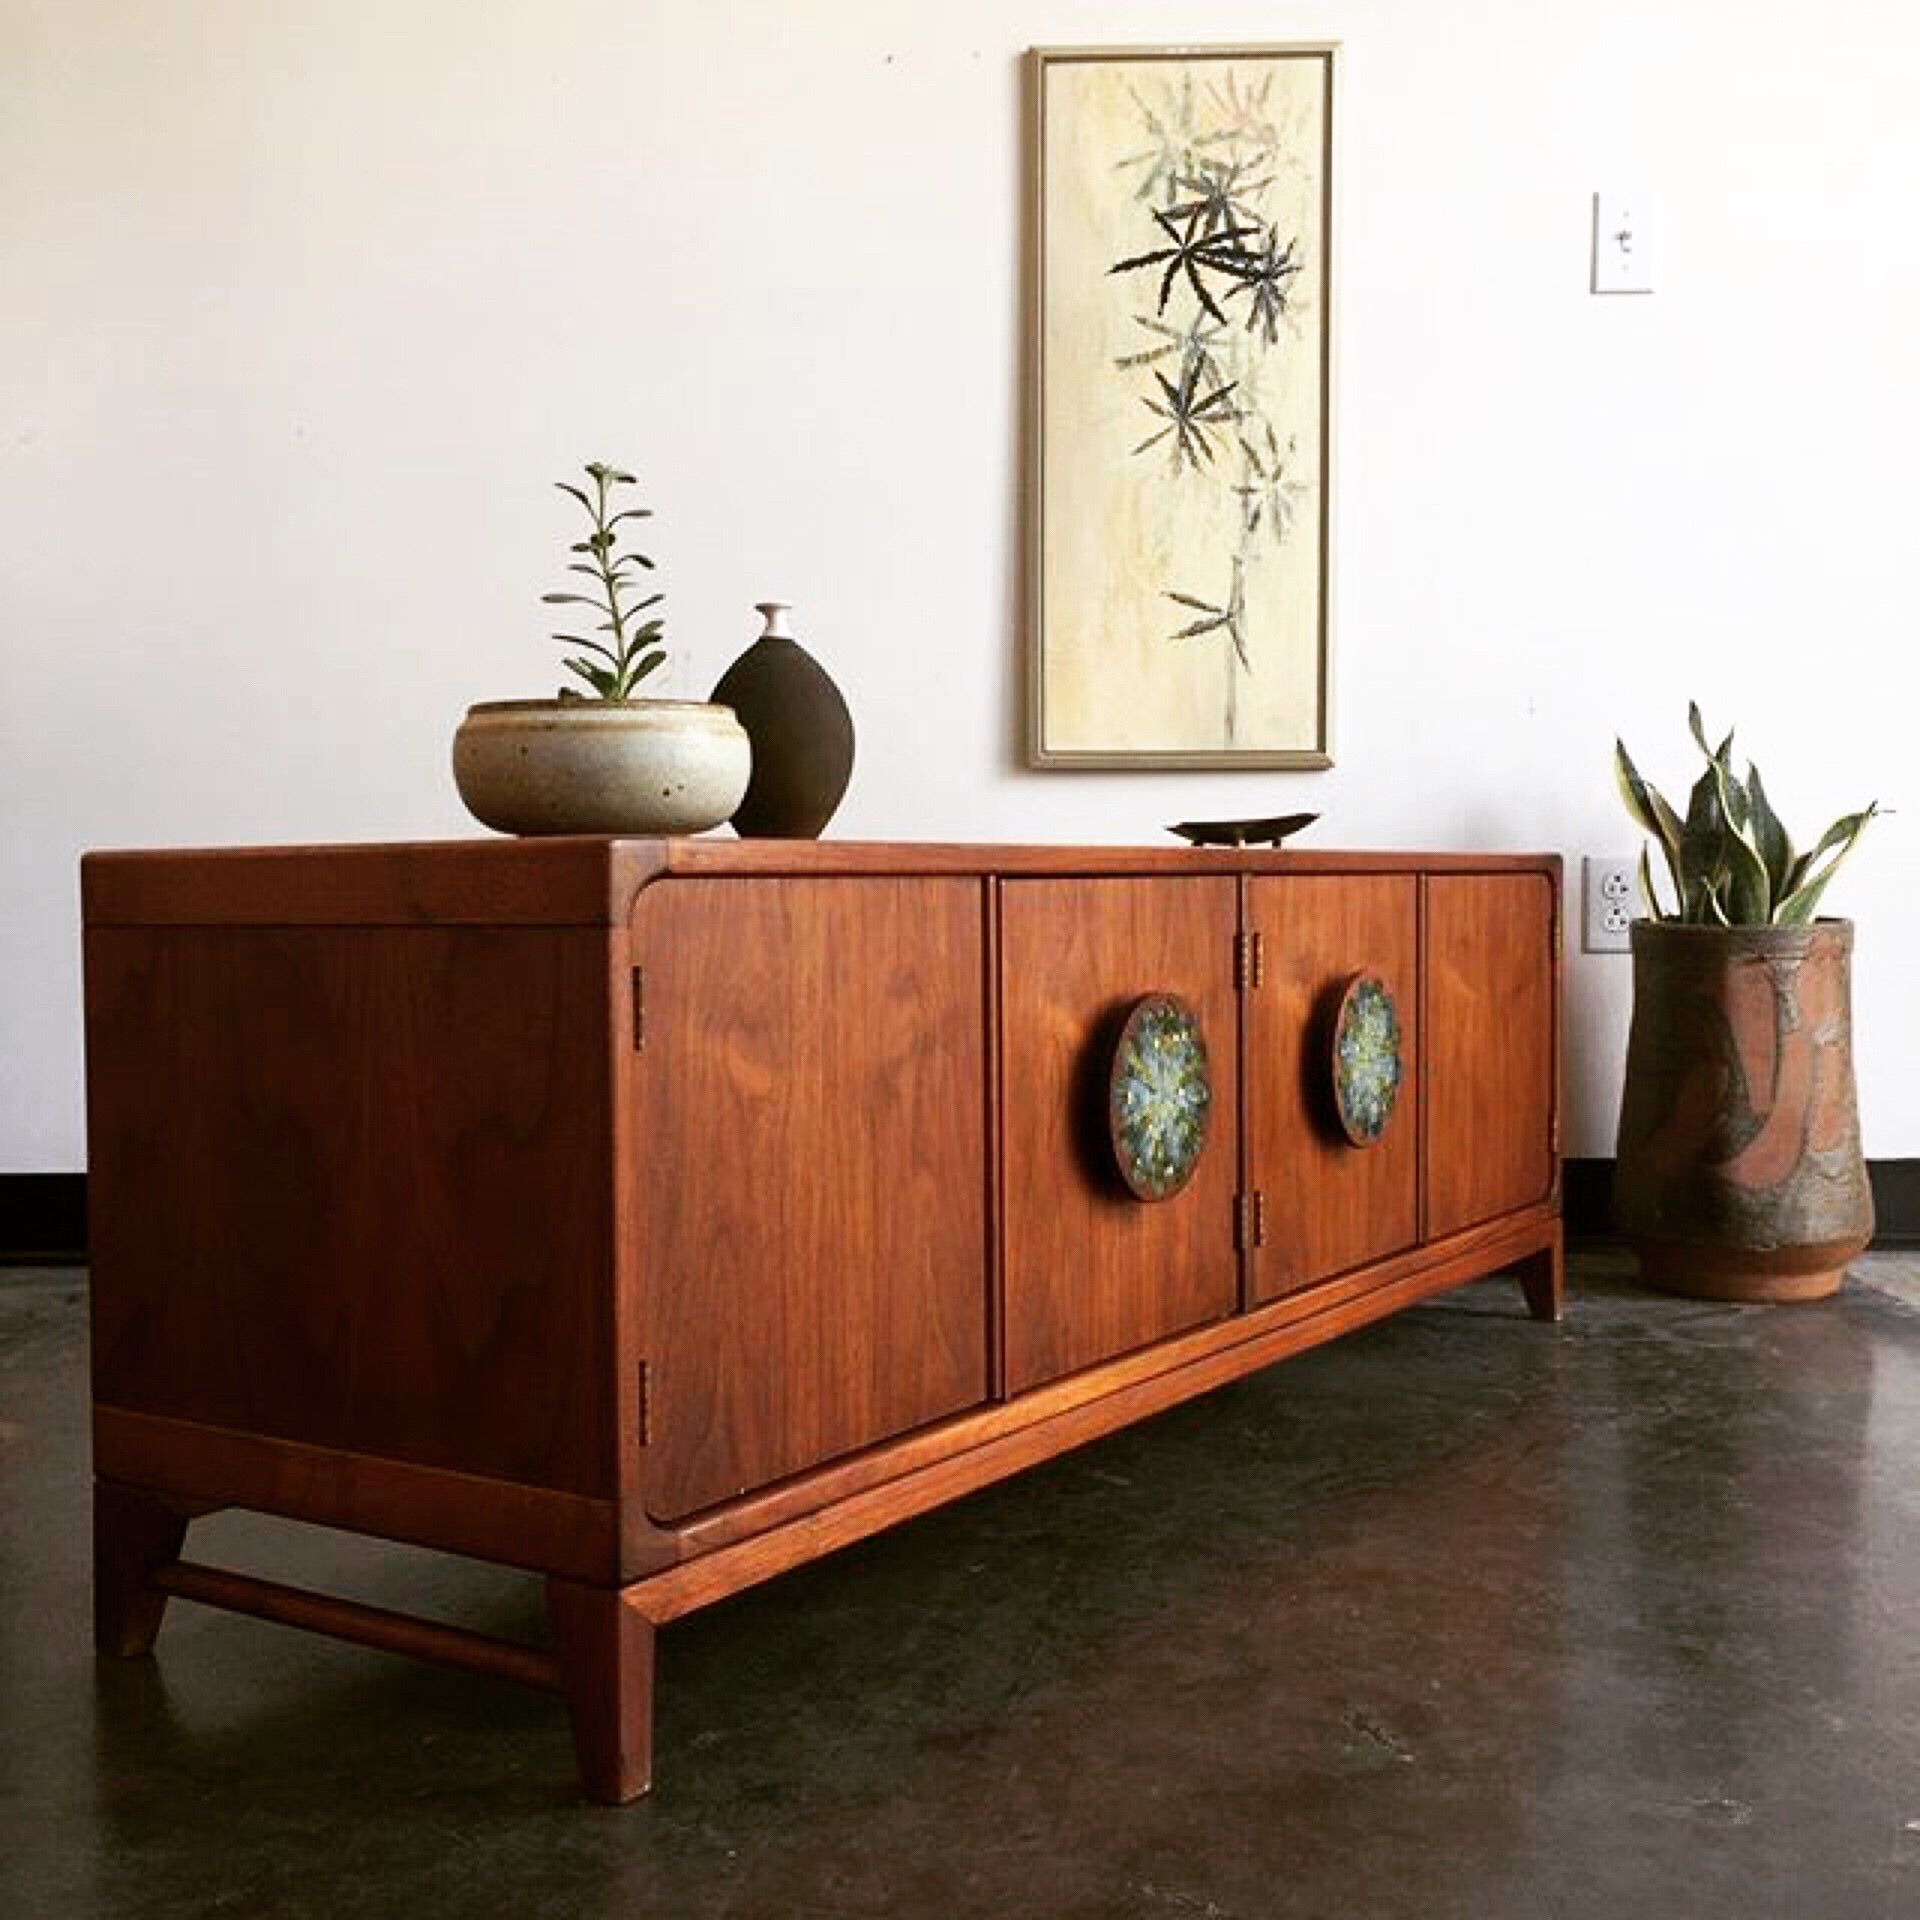 A Midcentury Modern Credenza Looking Very Much At Home With With Regard To Retro Holistic Credenzas (View 6 of 30)